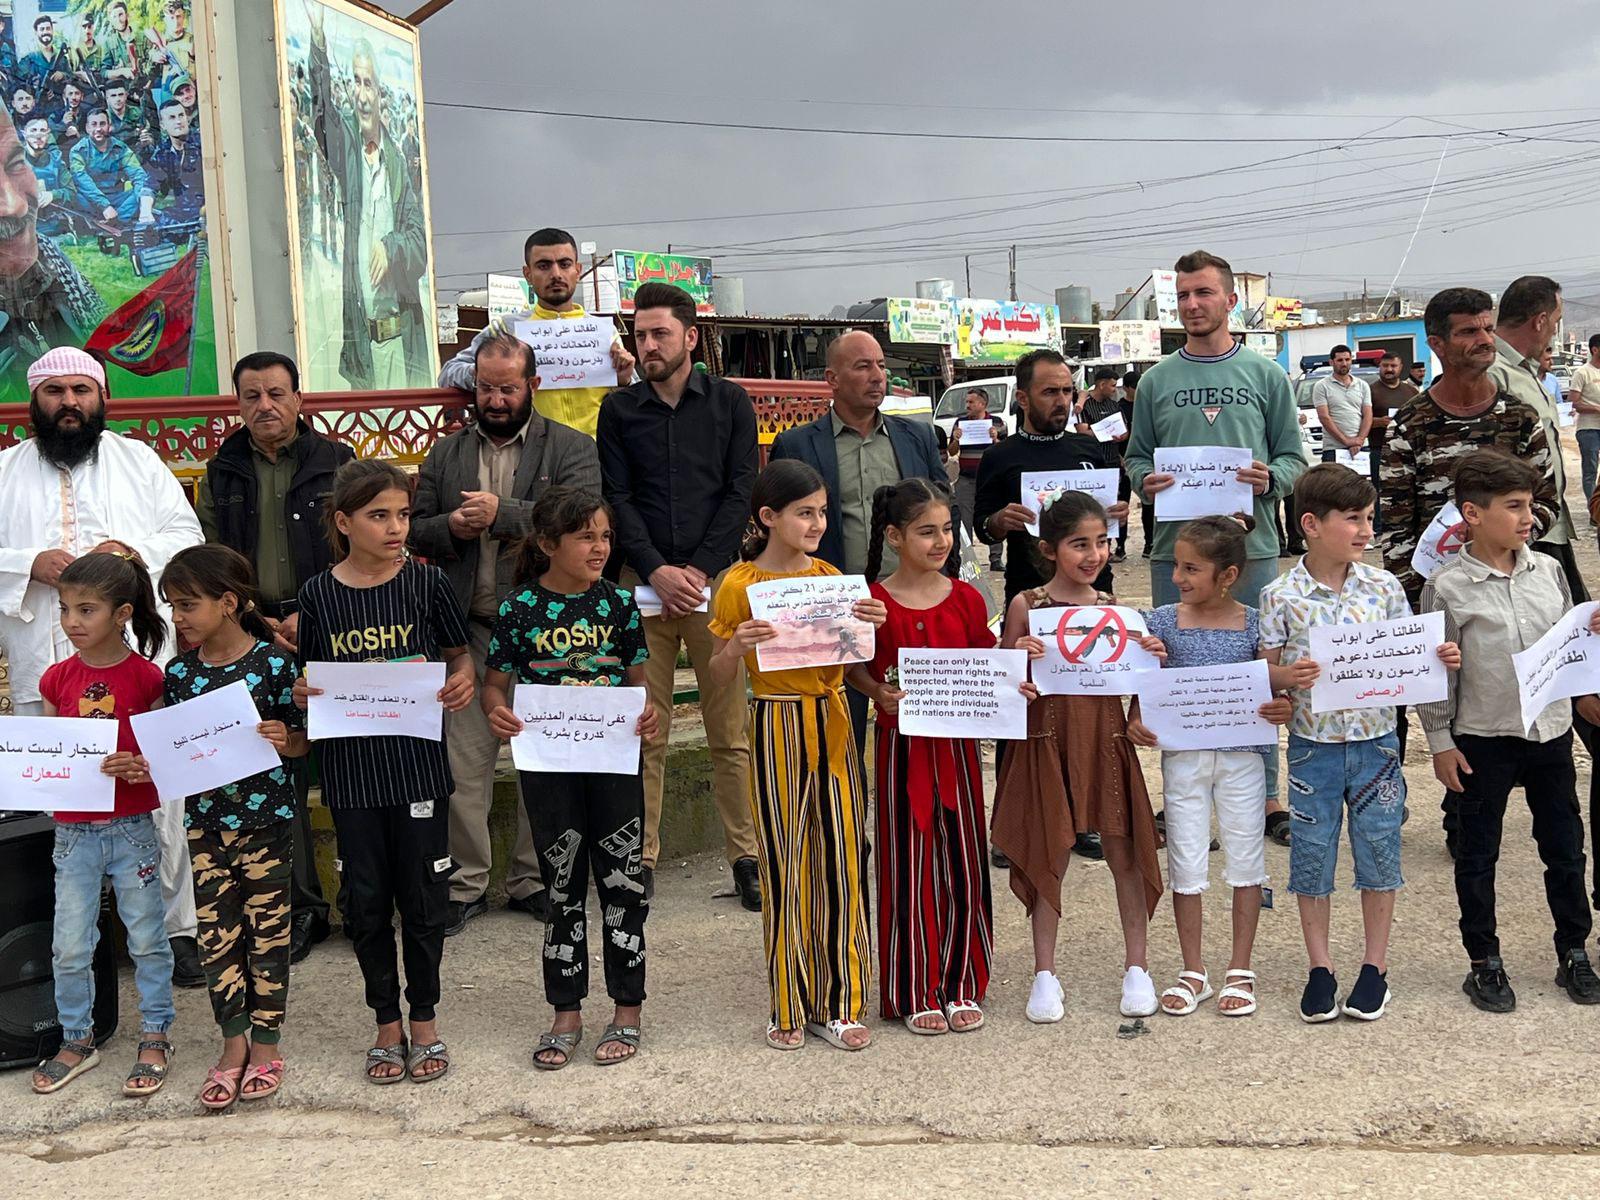 Adults and children in Sinjar protest and hold signs, calling on all armed groups to leave the area. The demonstrations come after recent fighting between the Iraqi army and a local militia.